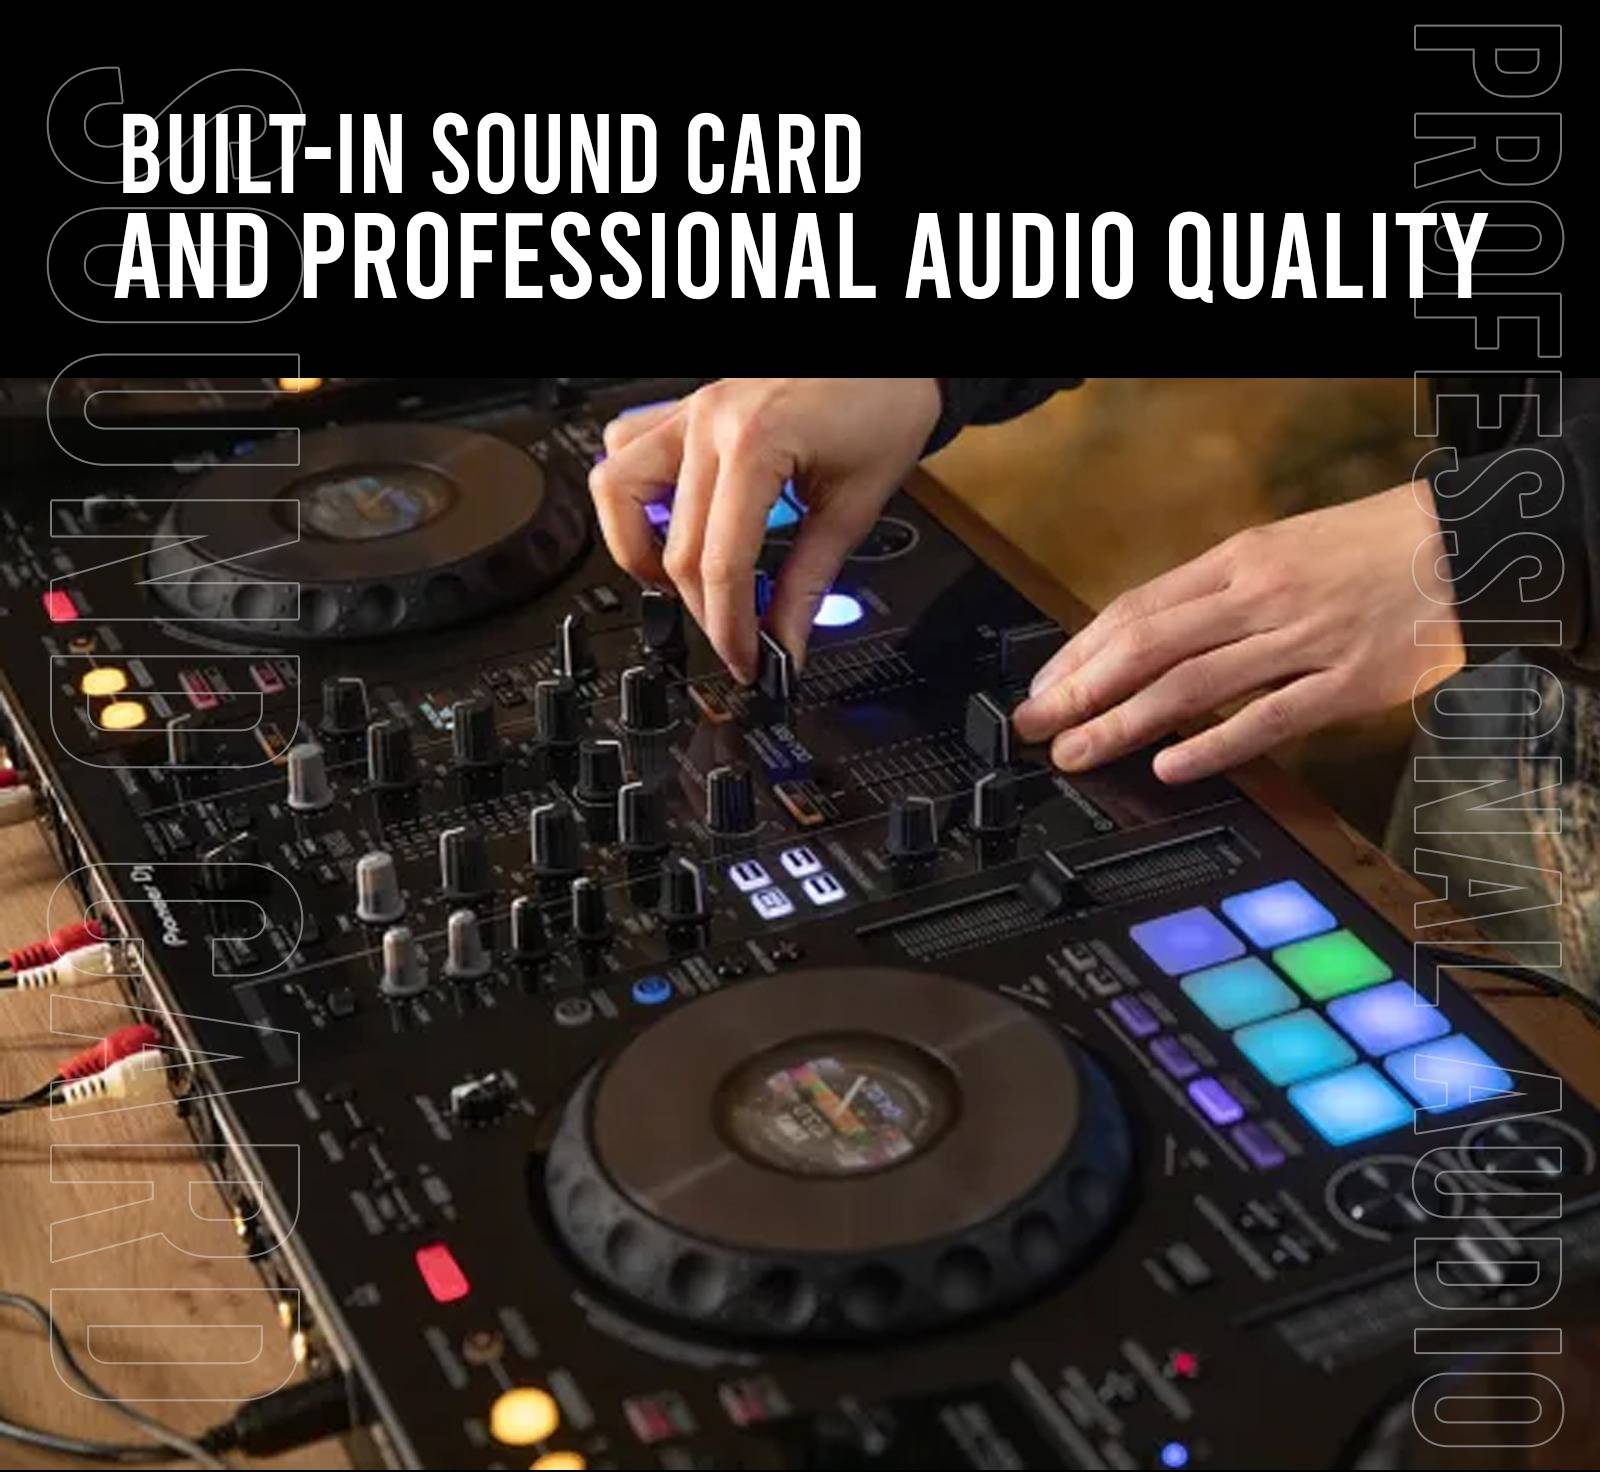 Built-In Sound Card and Professional Audio Quality